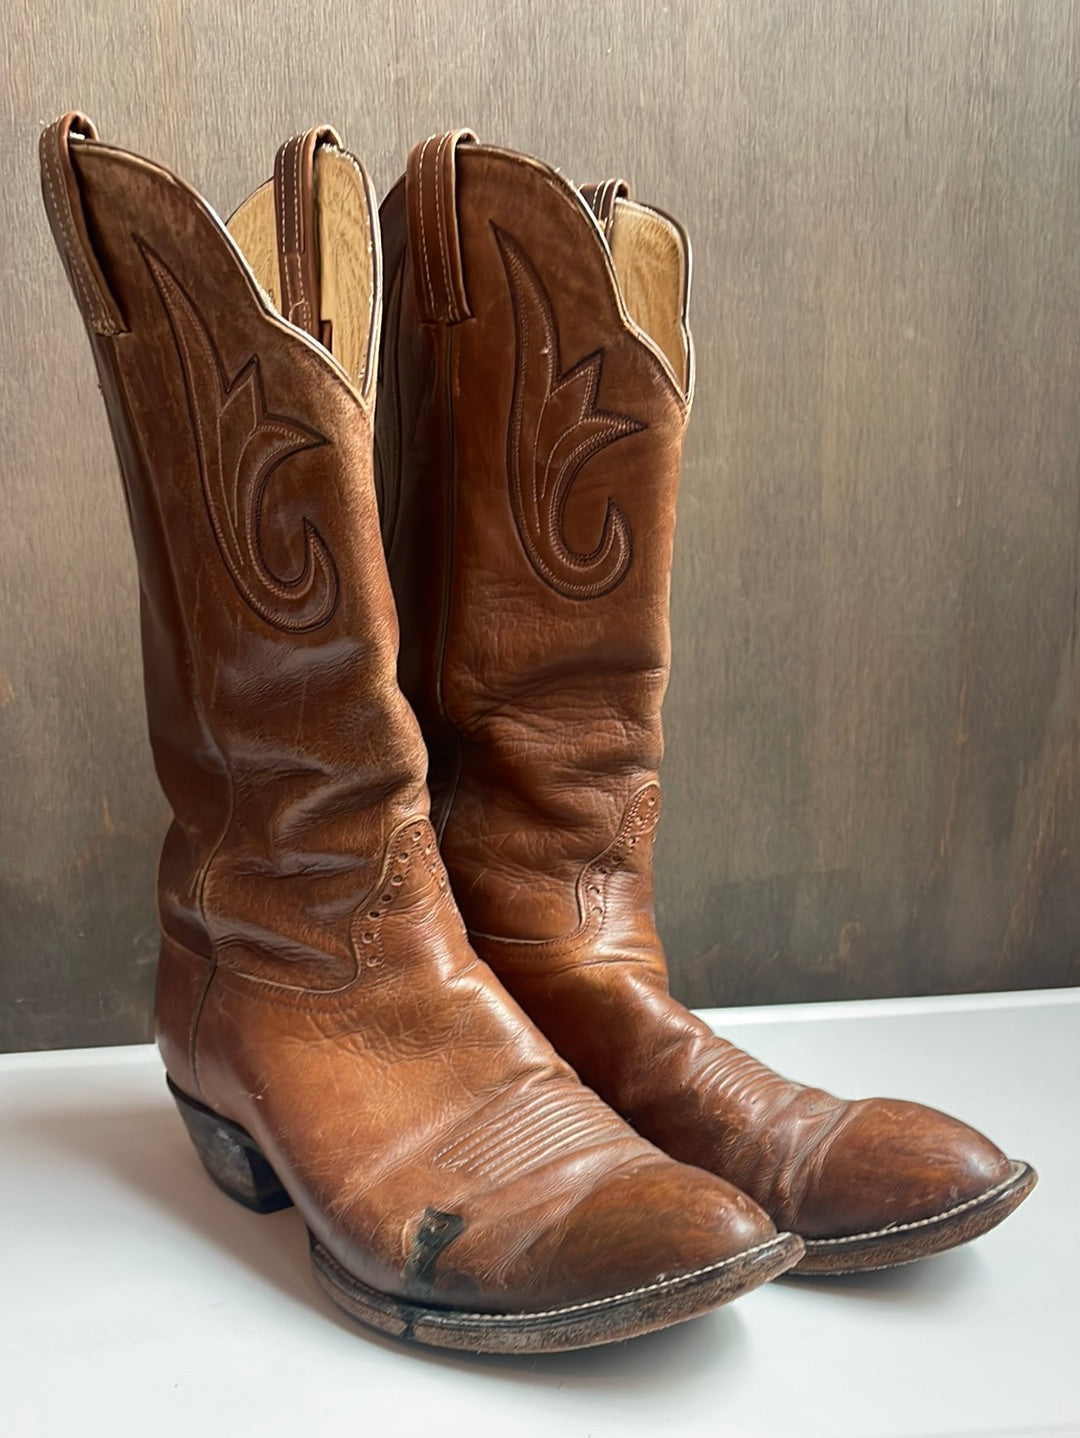 Vintage Hondo Brown Leather Boots